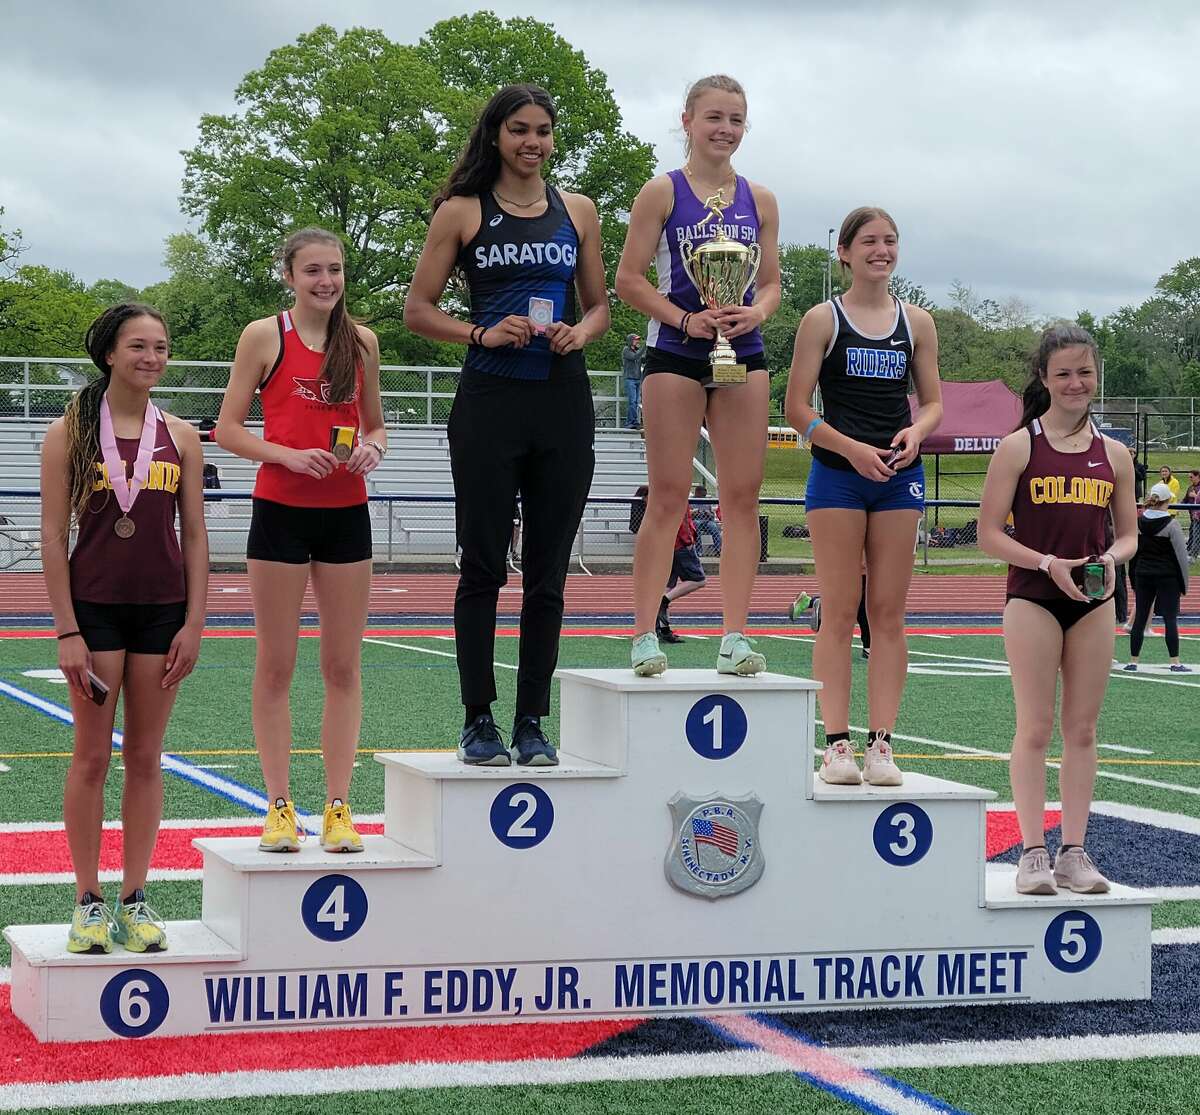 Ballston Spa’s Harriet Healey stands atop the podium after her win in the 400 at the Eddy Meet on Saturday at Schenectady High School.